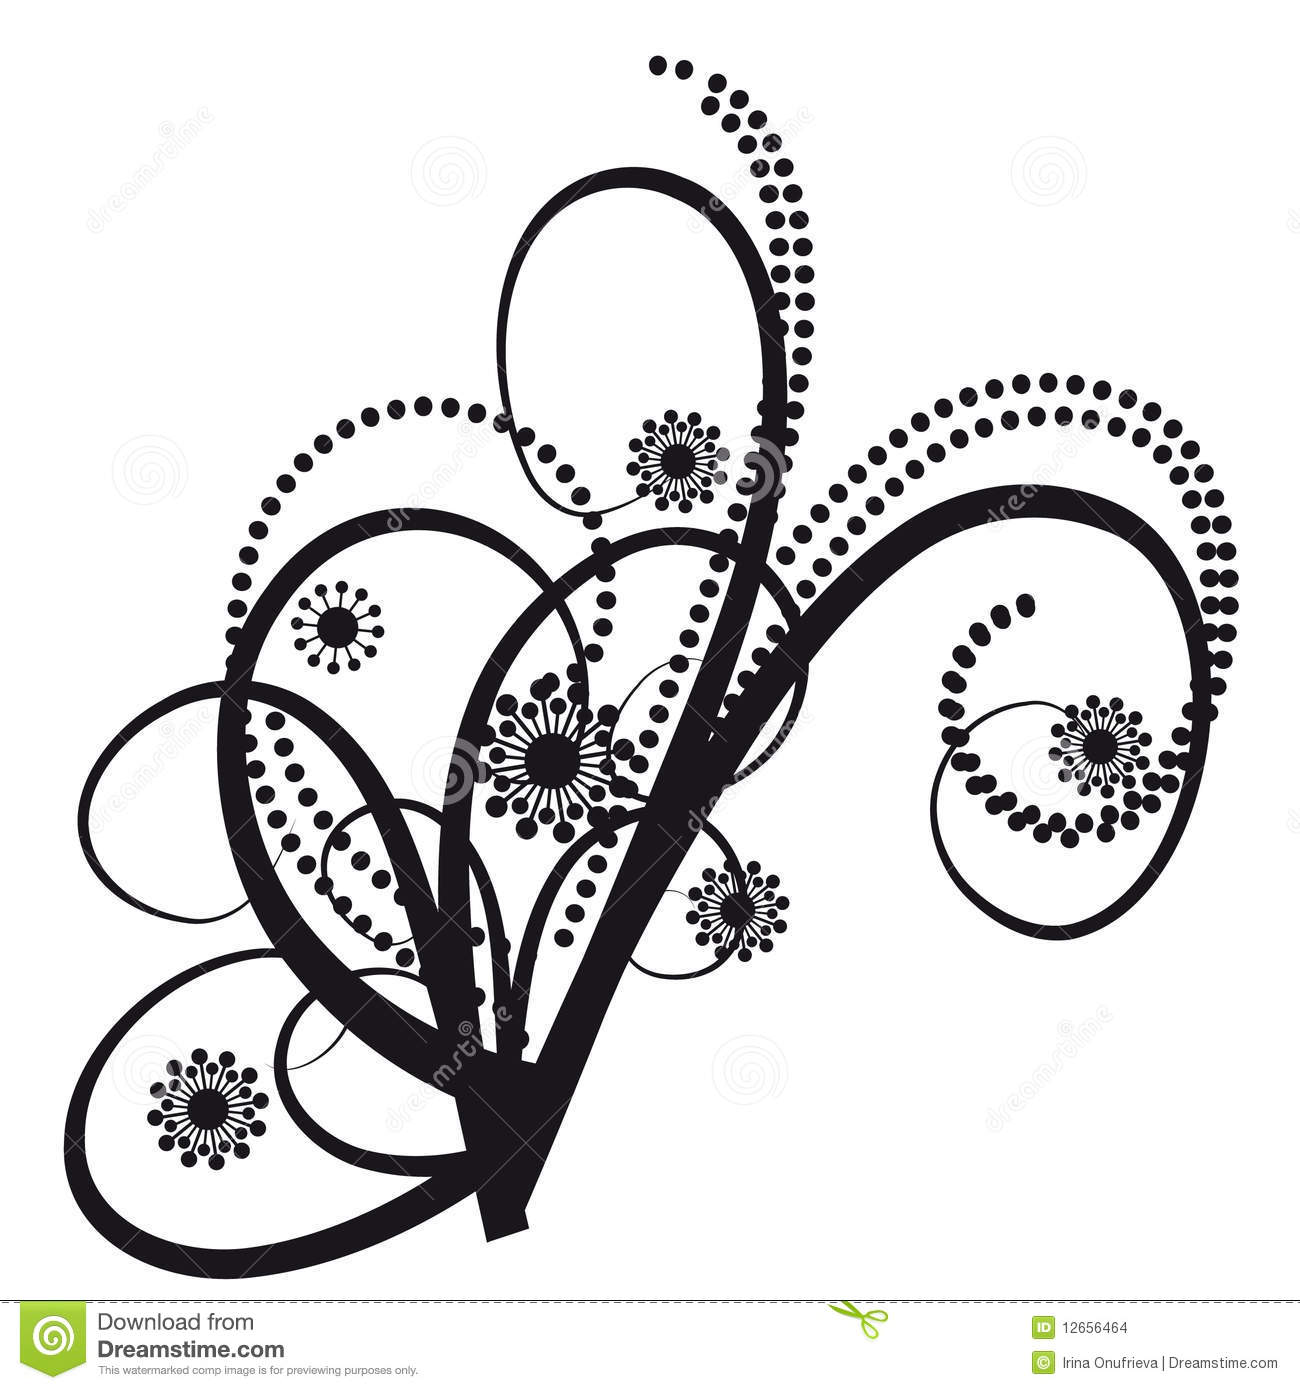 Tattoos In The Form Of An Abstract Bouquet  Vector Illustration